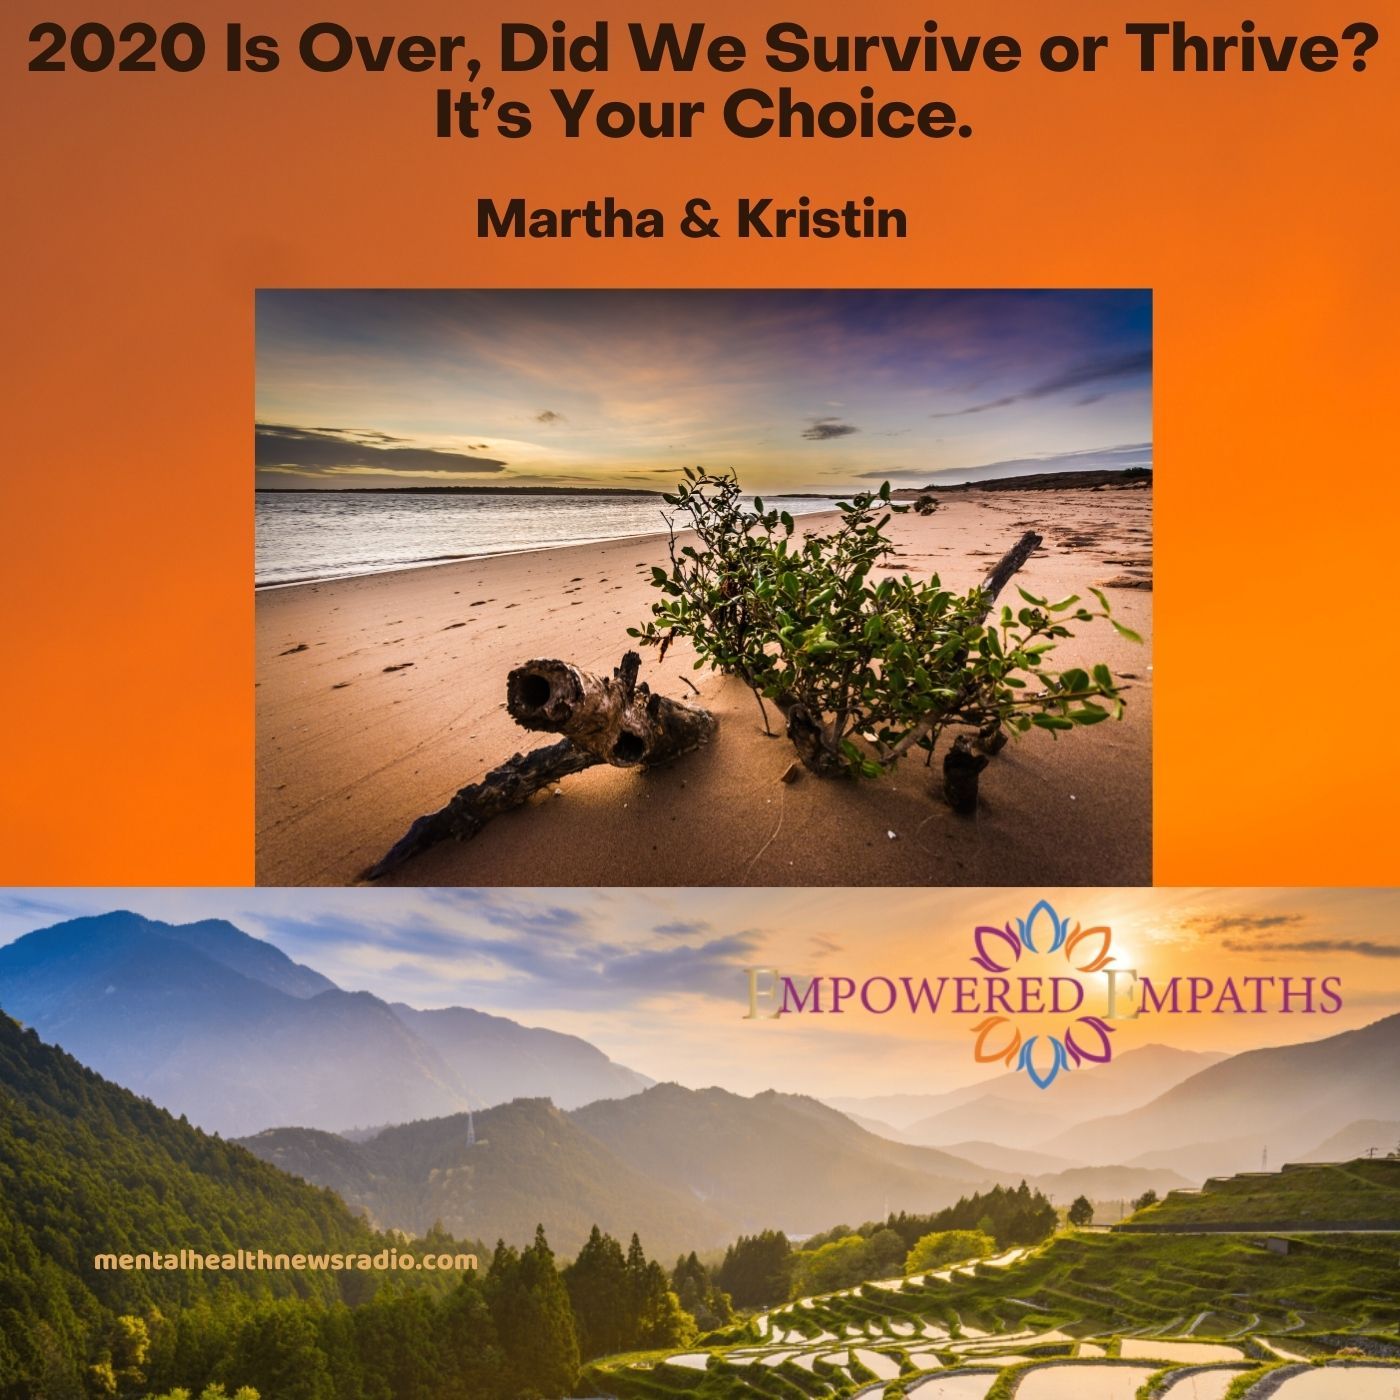 2020 Is Over, Did We Survive or Thrive? It’s Your Choice